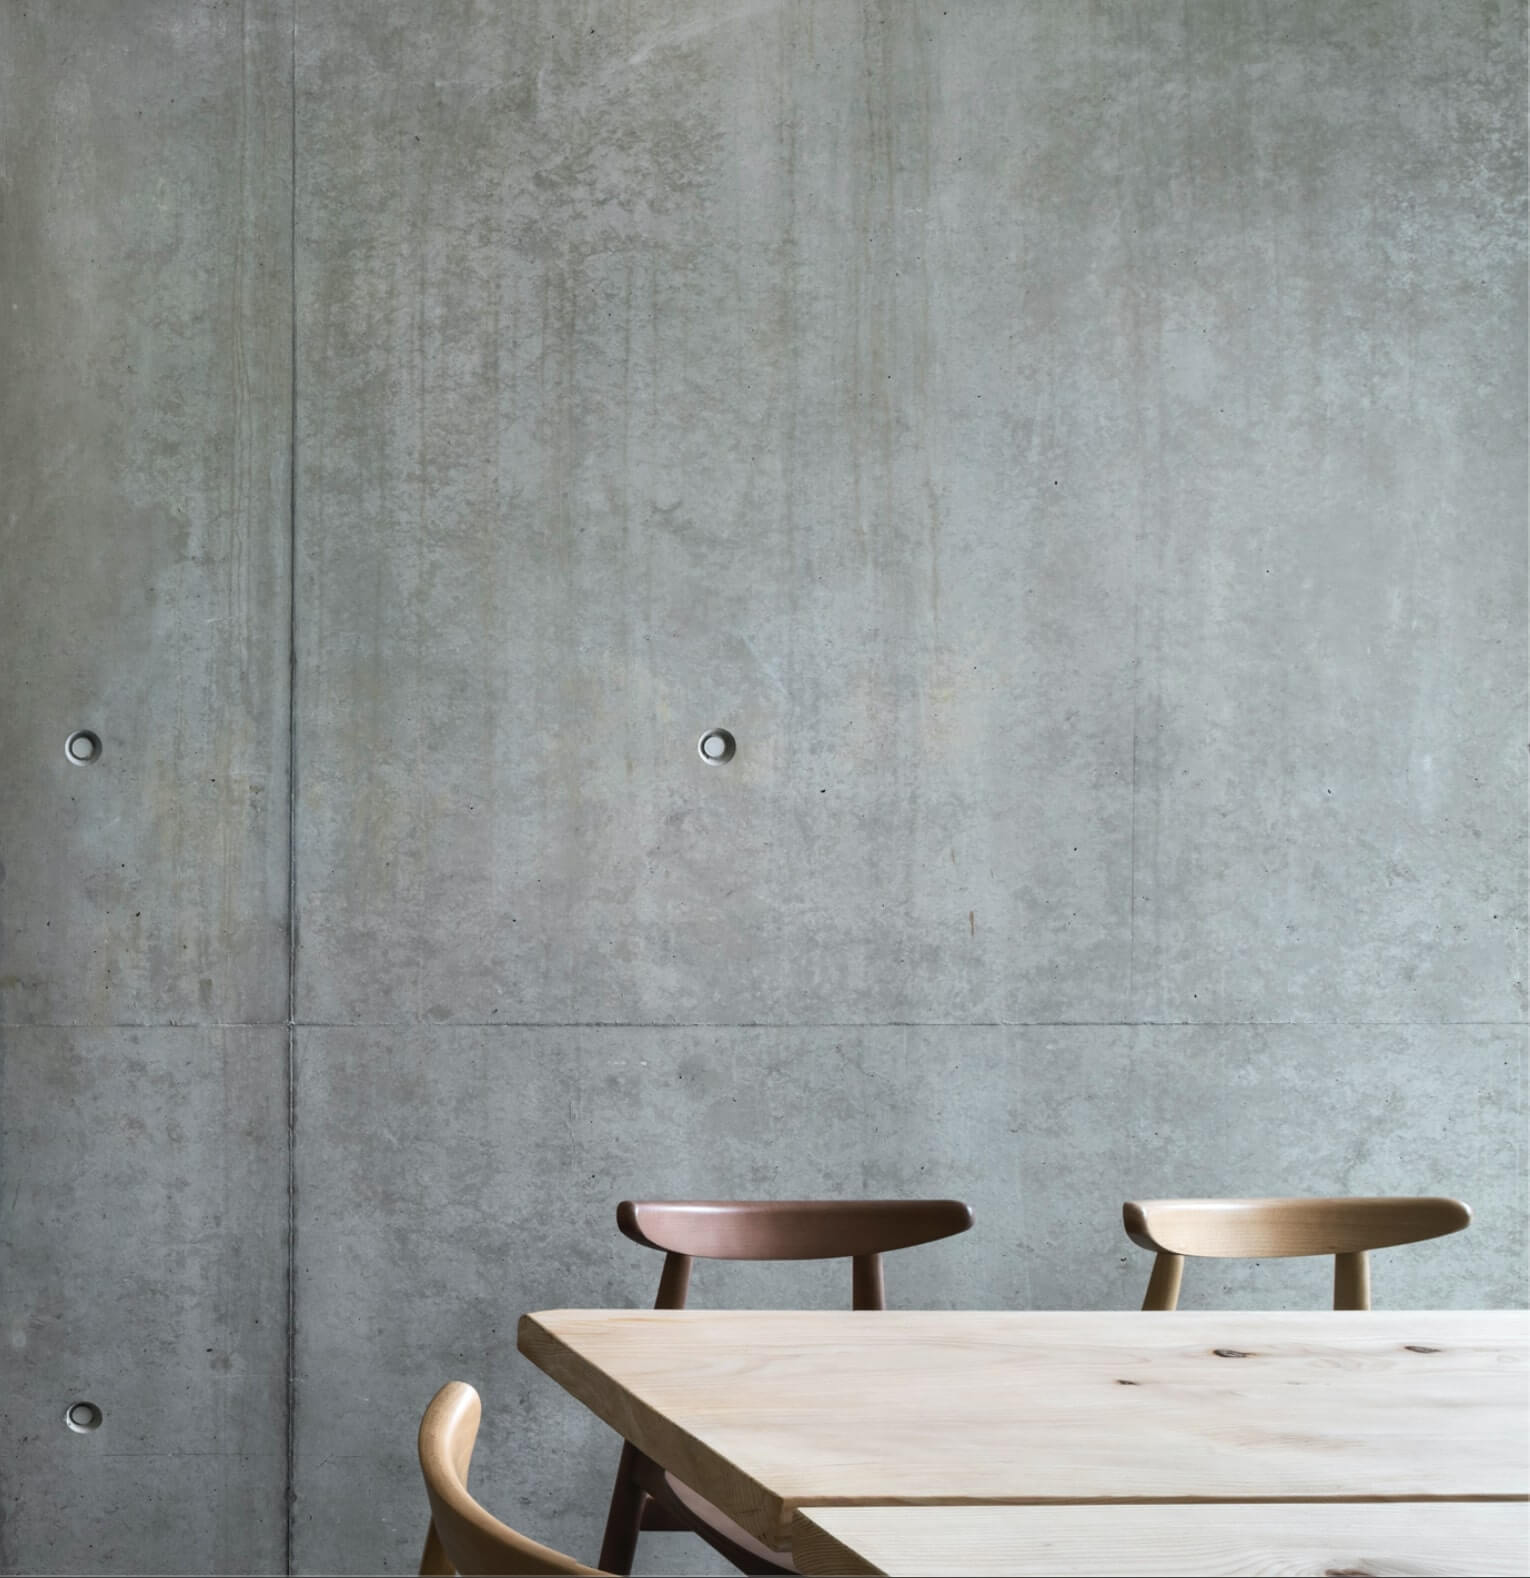 the wooden table and chairs are in front of a concret interior